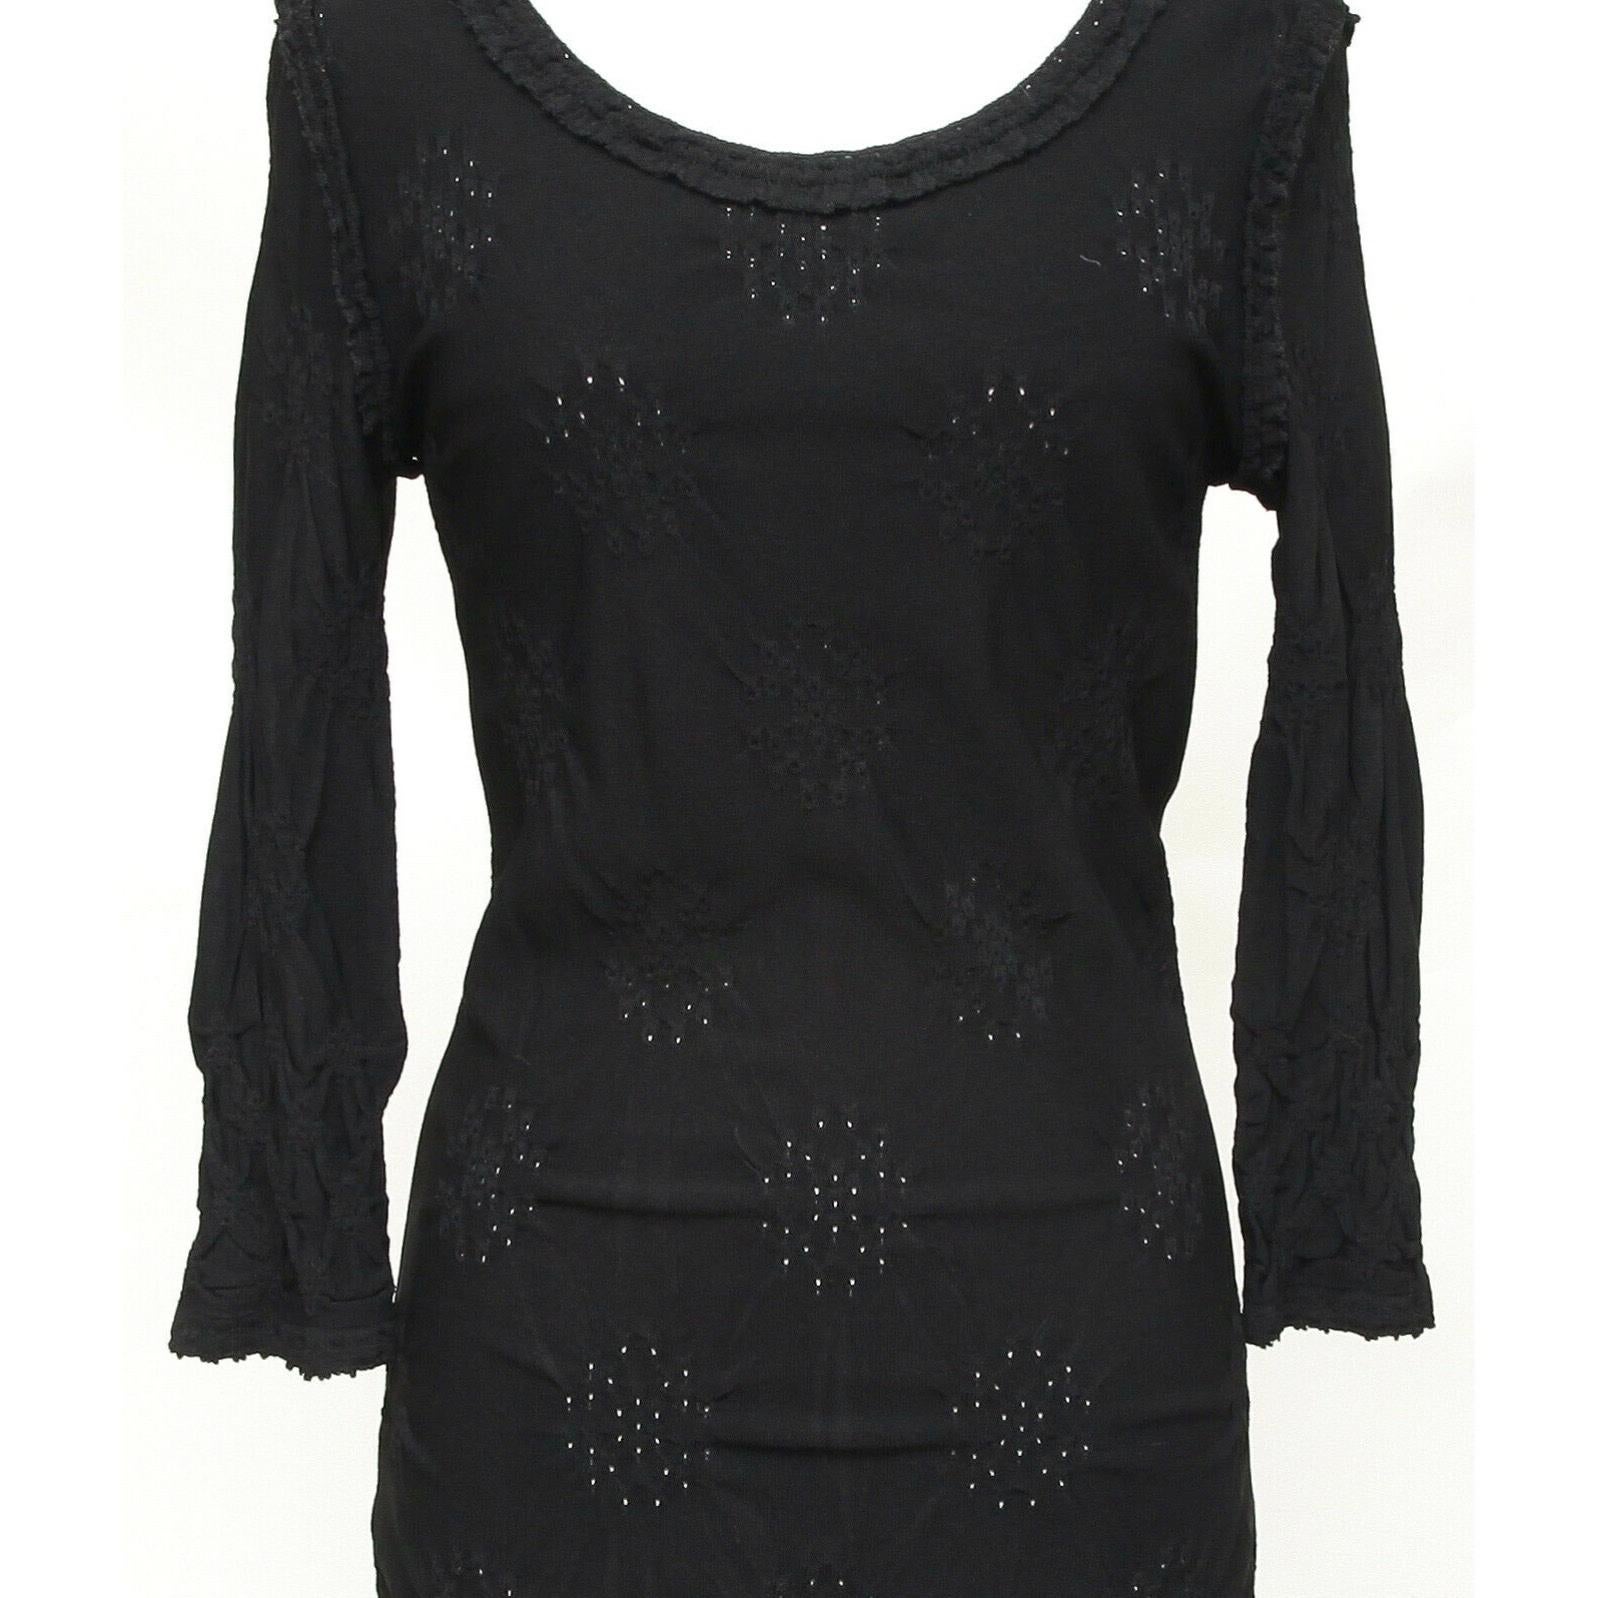 CHANEL Sweater Dress Black Knit Long Sleeve Pointelle Silver 36 Cruise 2011 In Good Condition For Sale In Hollywood, FL